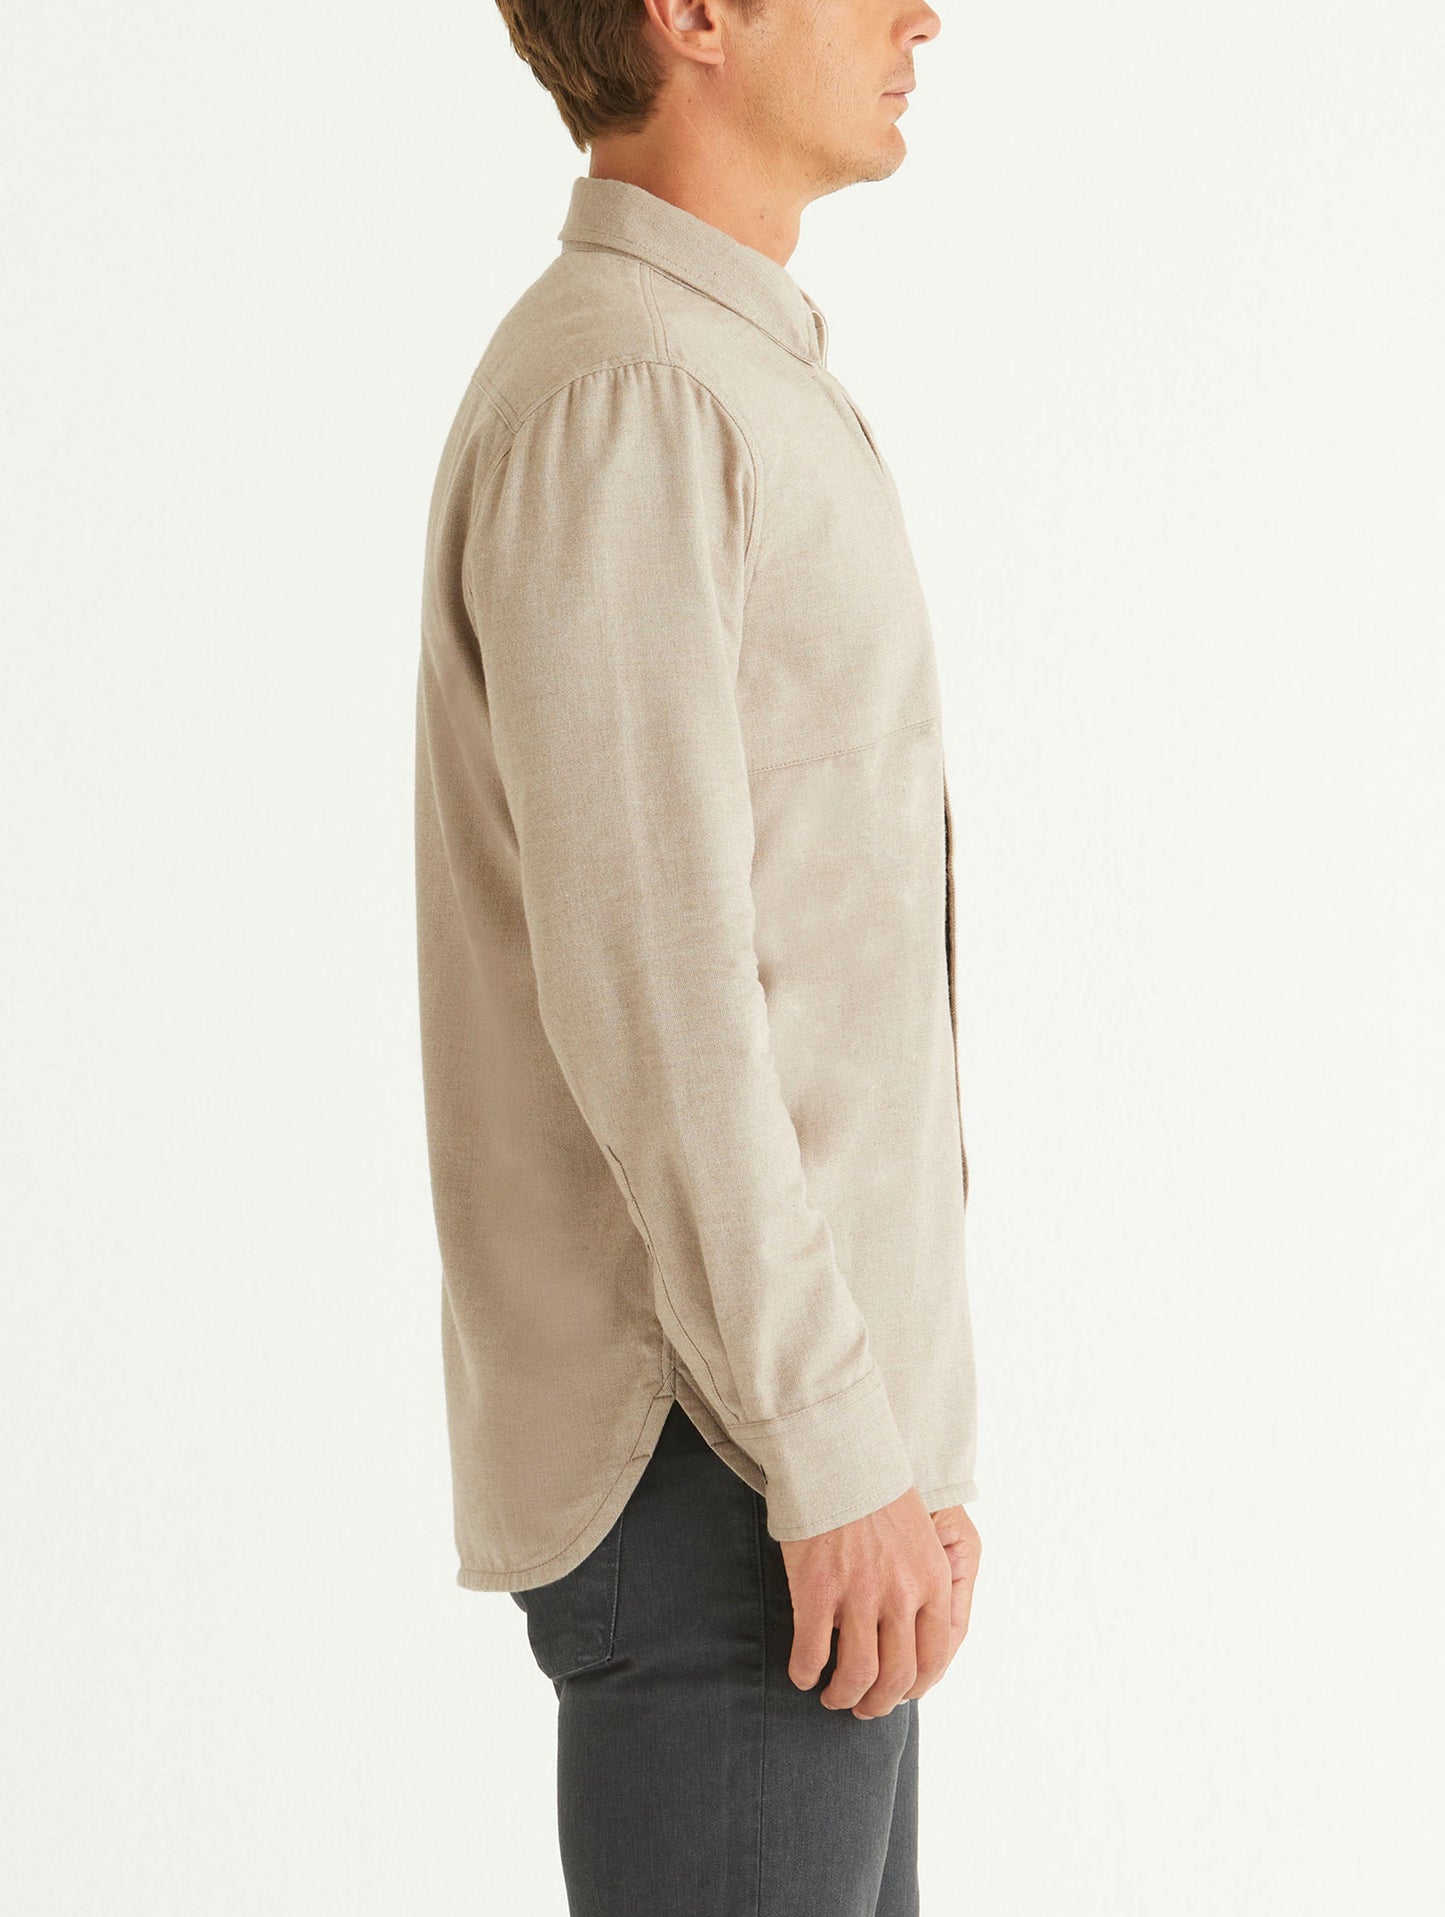 button-down shirt for men from Aether Apparel